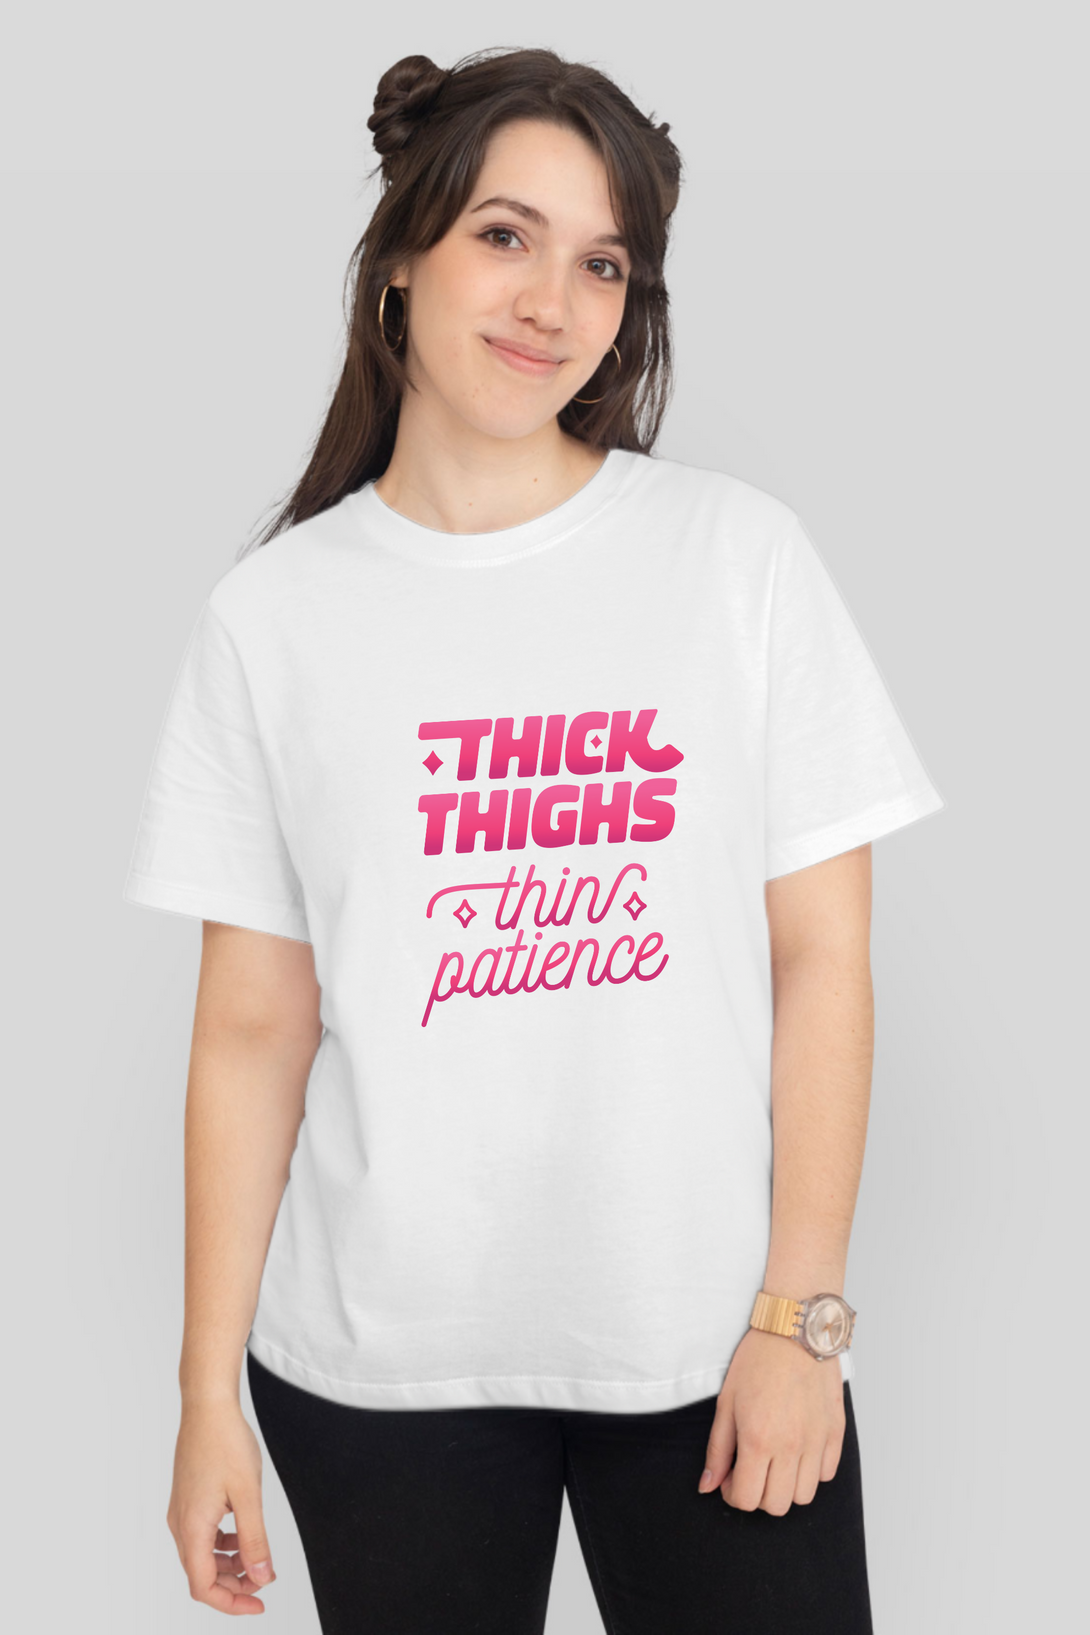 Thick Things Thin Patience Printed T-Shirt For Women - WowWaves - 5